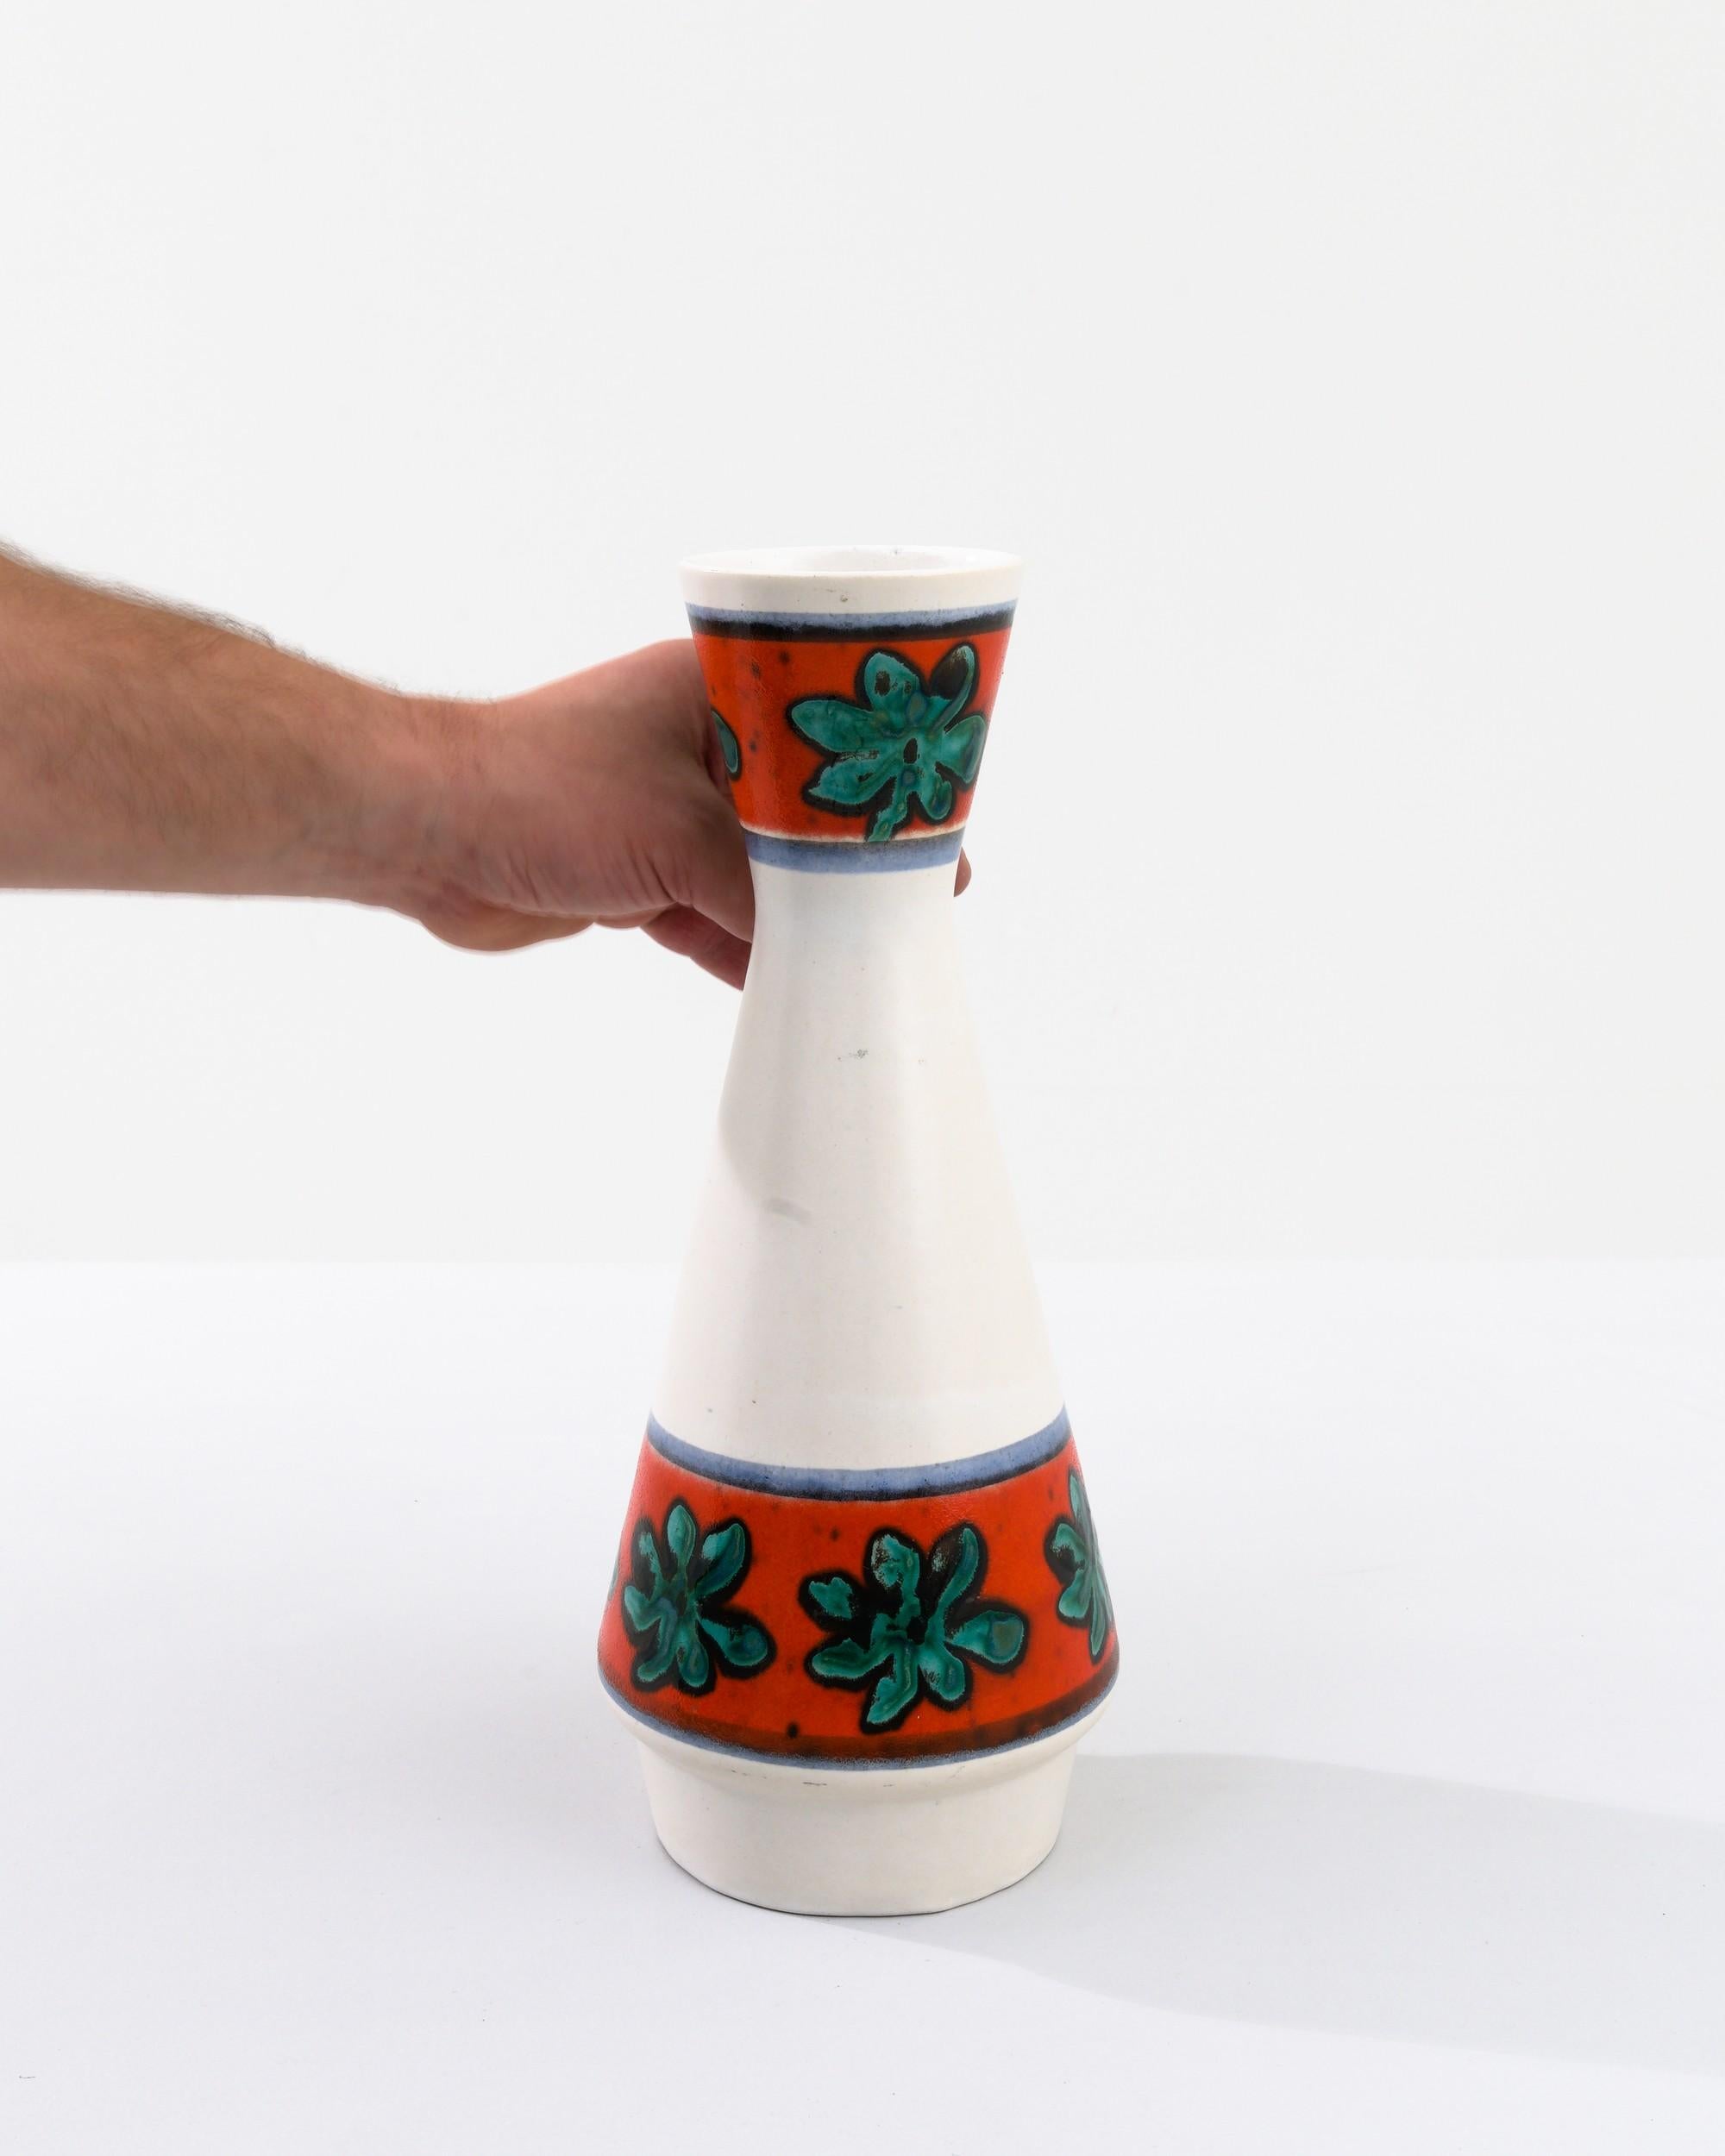 1960s Mid-Century Modern W. Germany Ceramic Vase In Good Condition For Sale In High Point, NC